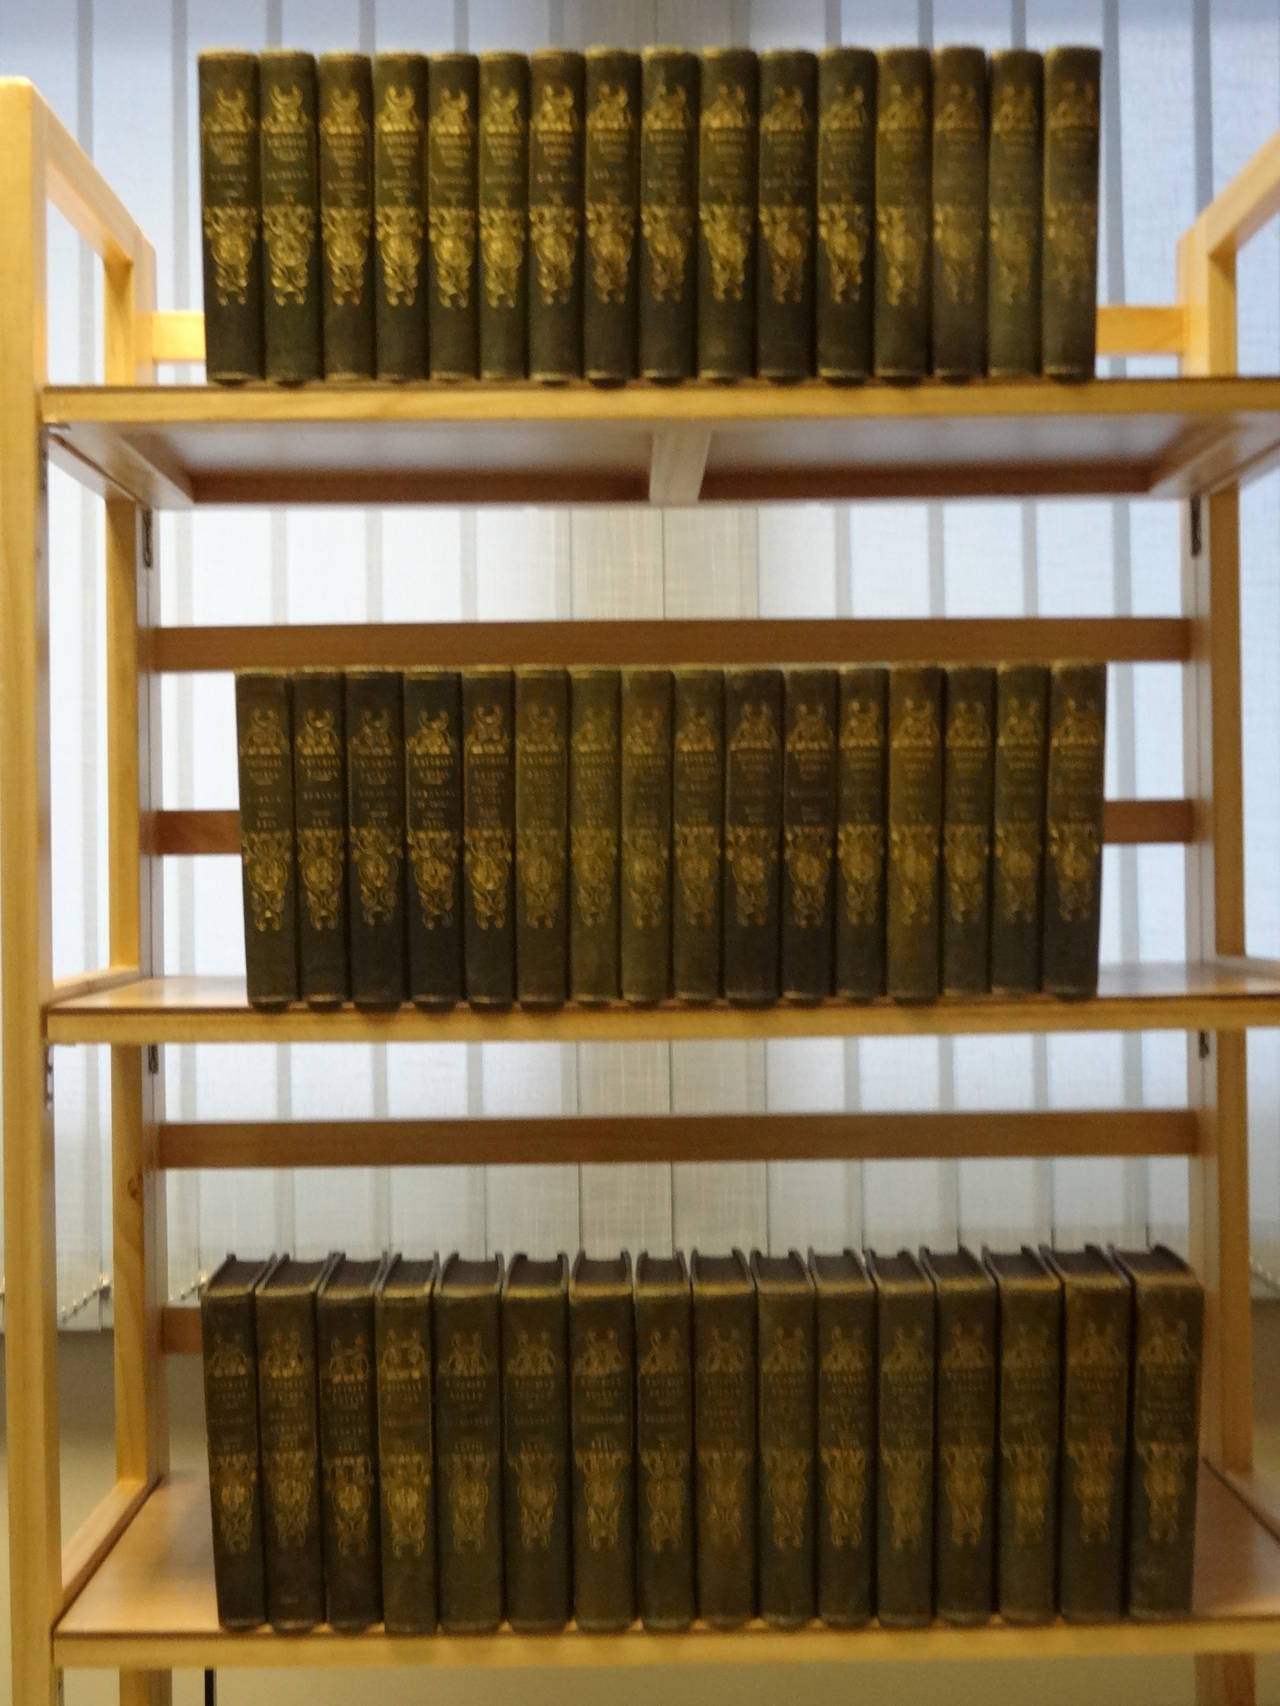 Complete set of the 48 volumes comprising The Waverley Novels by Sir Walter Scott. 

Marbled boards quarter green calf title and device to spines in gilt. 

Published by Robert Cadell, Edinburgh, between 1829 and 1833 (third edition)